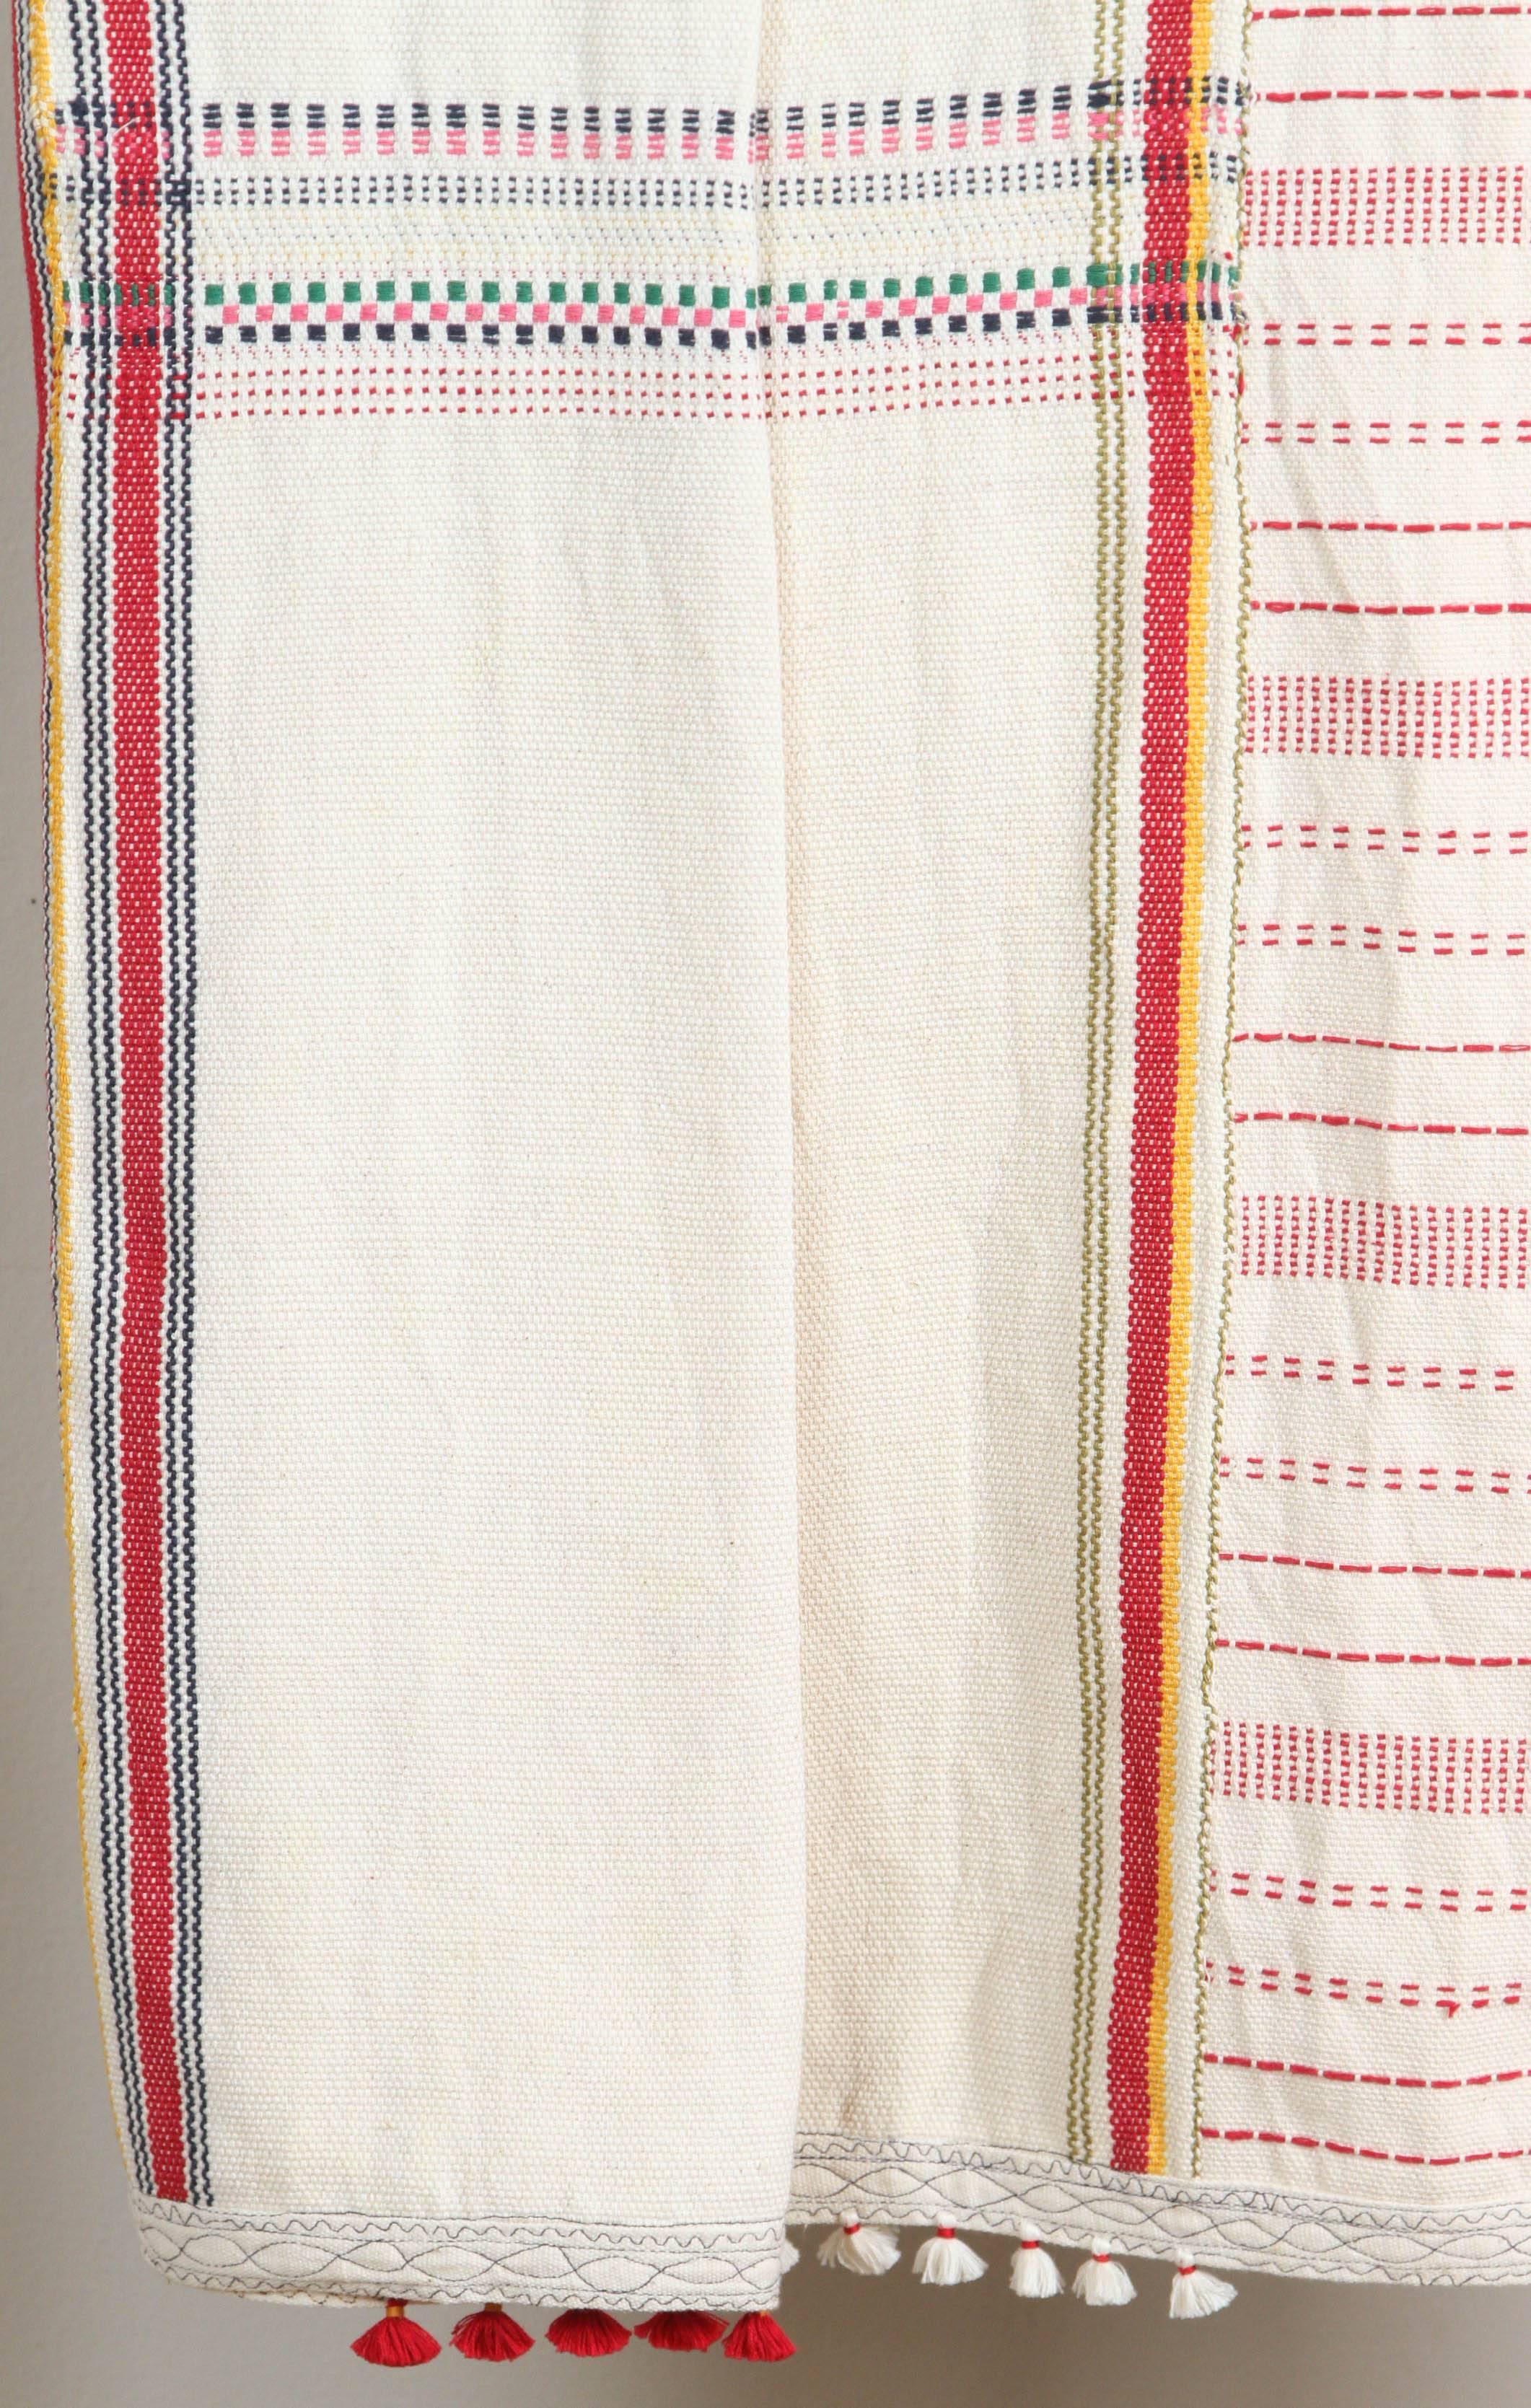 Kala naturally dyed organic cotton from Gujarat, India.  Hand loomed using traditional Indian textile techniques to produce extra weft woven stripes and geometric designs.  Ivory, red, pink, blue, yellow and green. Some embroidery and added red and